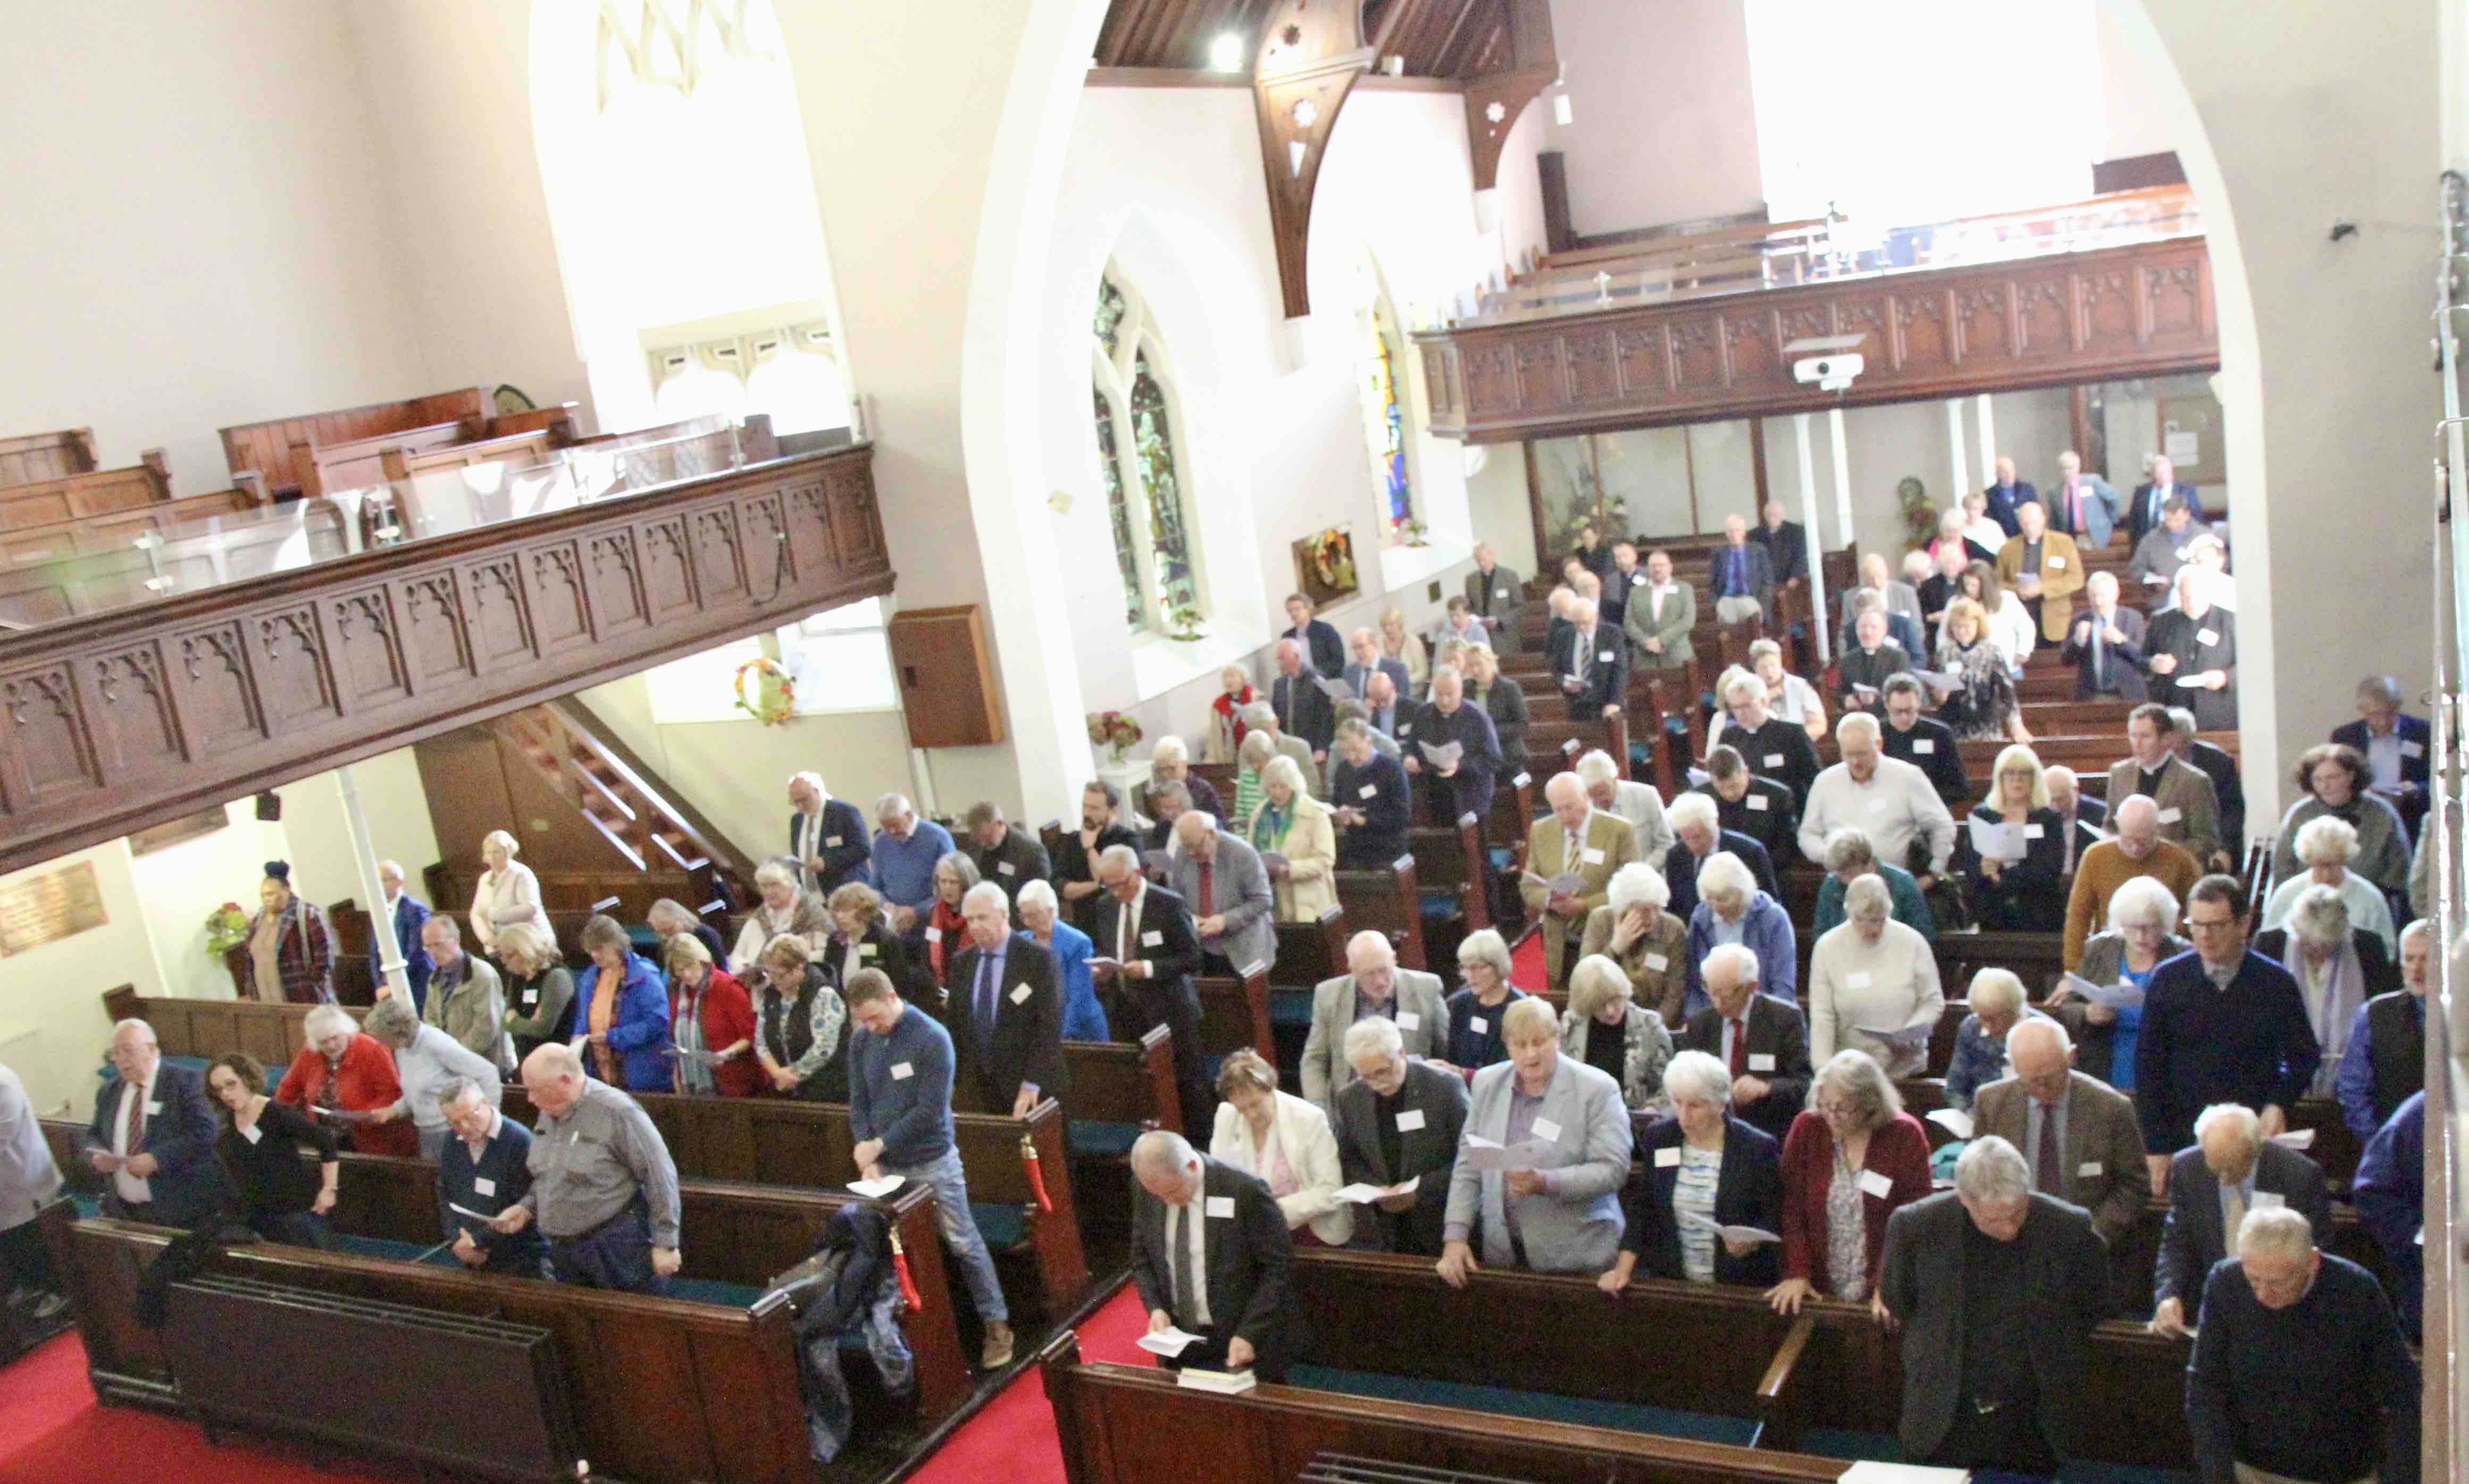 The congregation at the Synod Service.